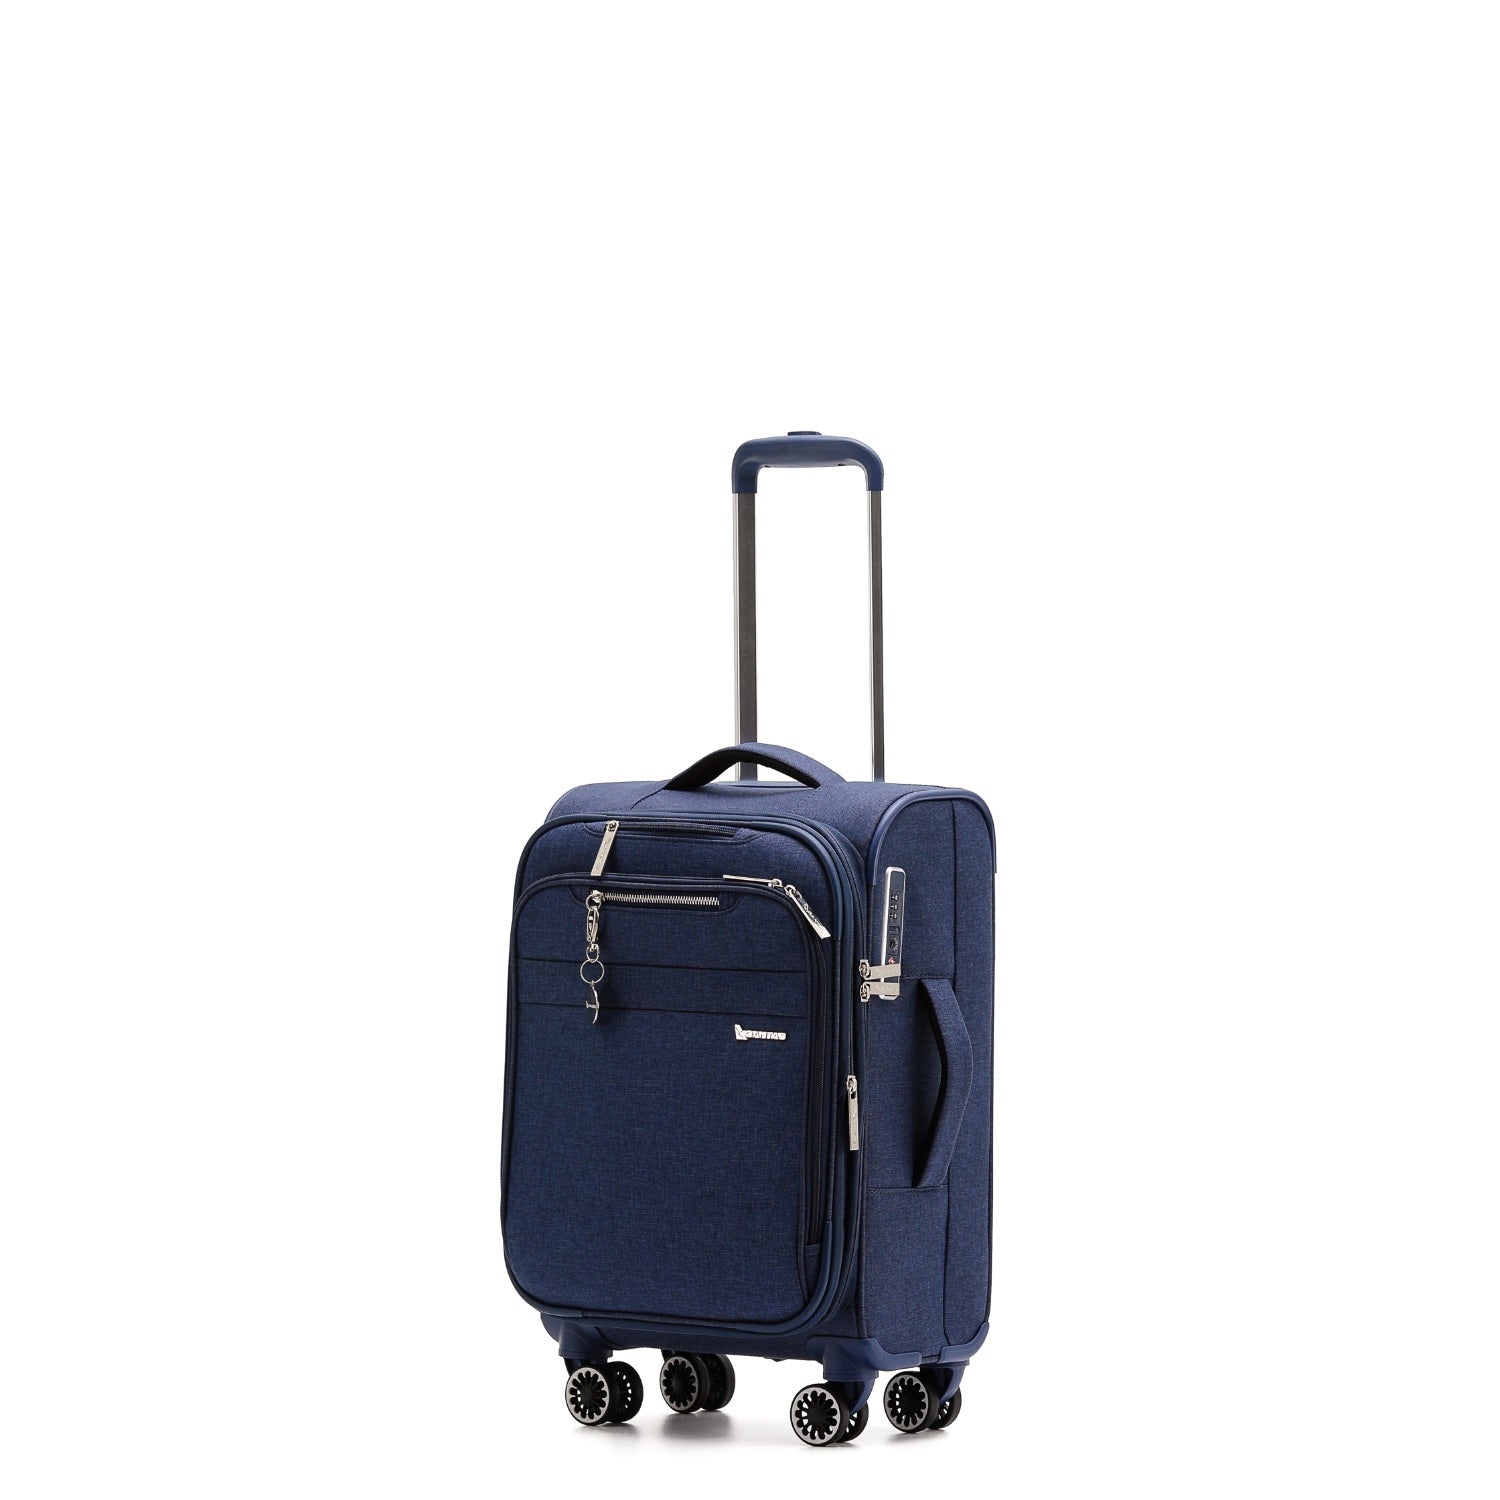 Qantas - QF400 55cm Small Adelaide Soft sided spinner - Navy-5